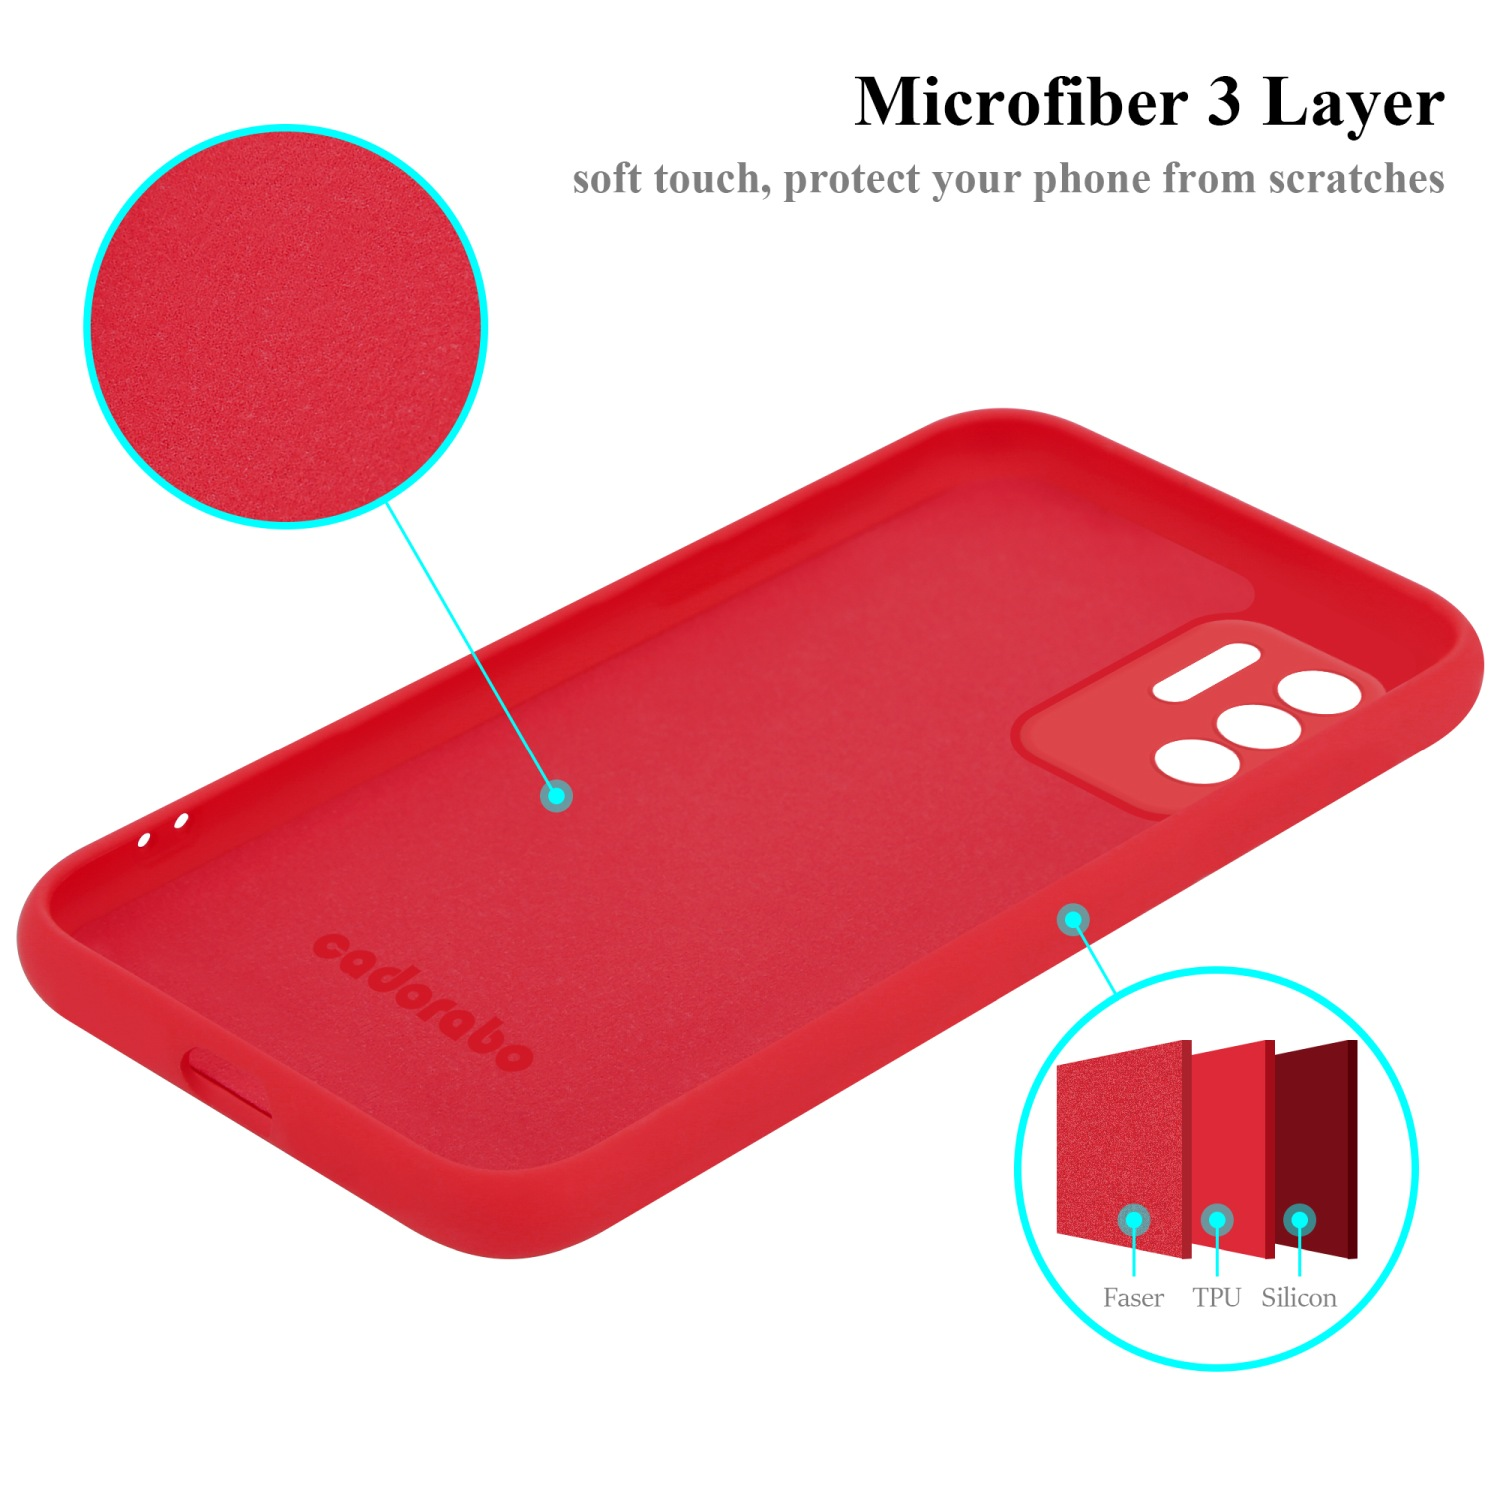 A94 Backcover, Oppo, ROT LIQUID im CADORABO Hülle Style, 5G, Liquid Case Silicone